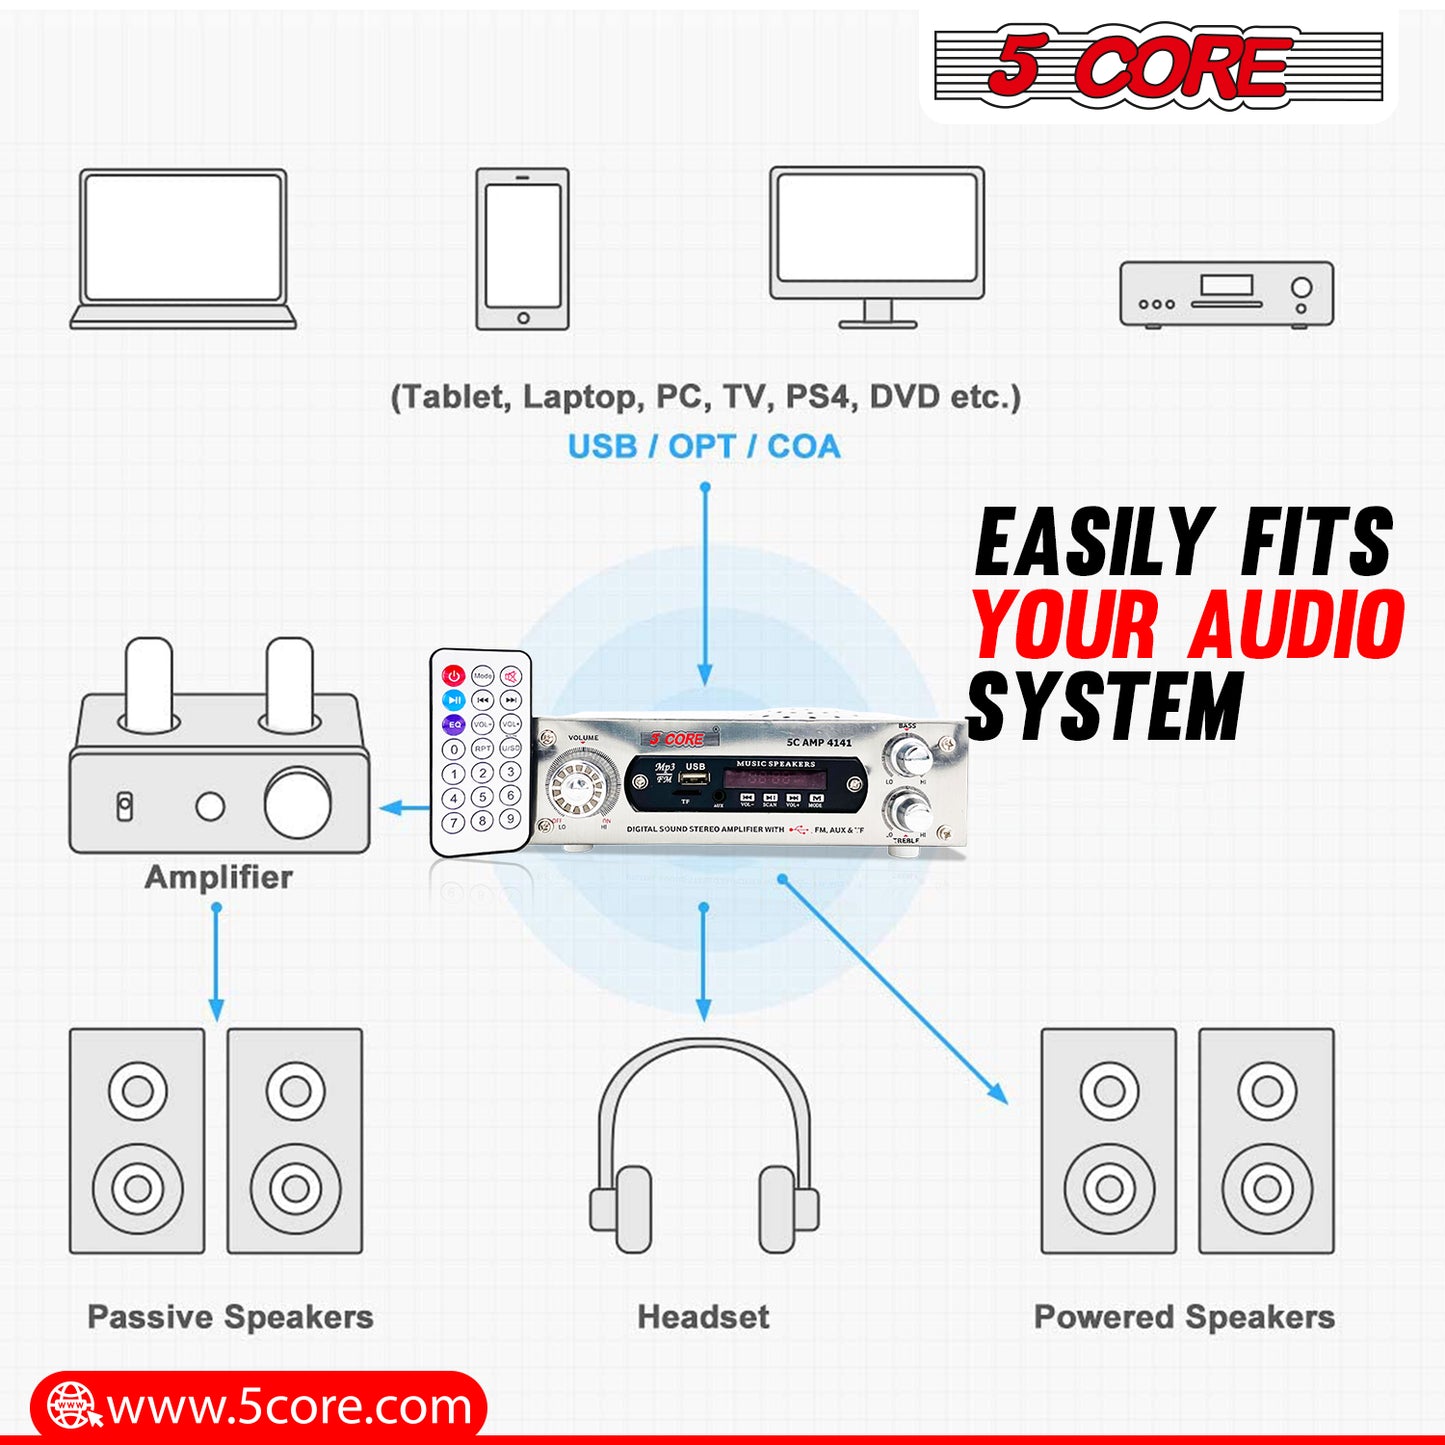 5Core Amplifier Home Audio 400W in-Built Speaker Mini Stereo Dual Channel LCD Display MMC/TF AUX USB with Volume, Bass, and Treble Control for Home Theater, PA, RV, Boat, Tablet PC, Studio AMP 4141